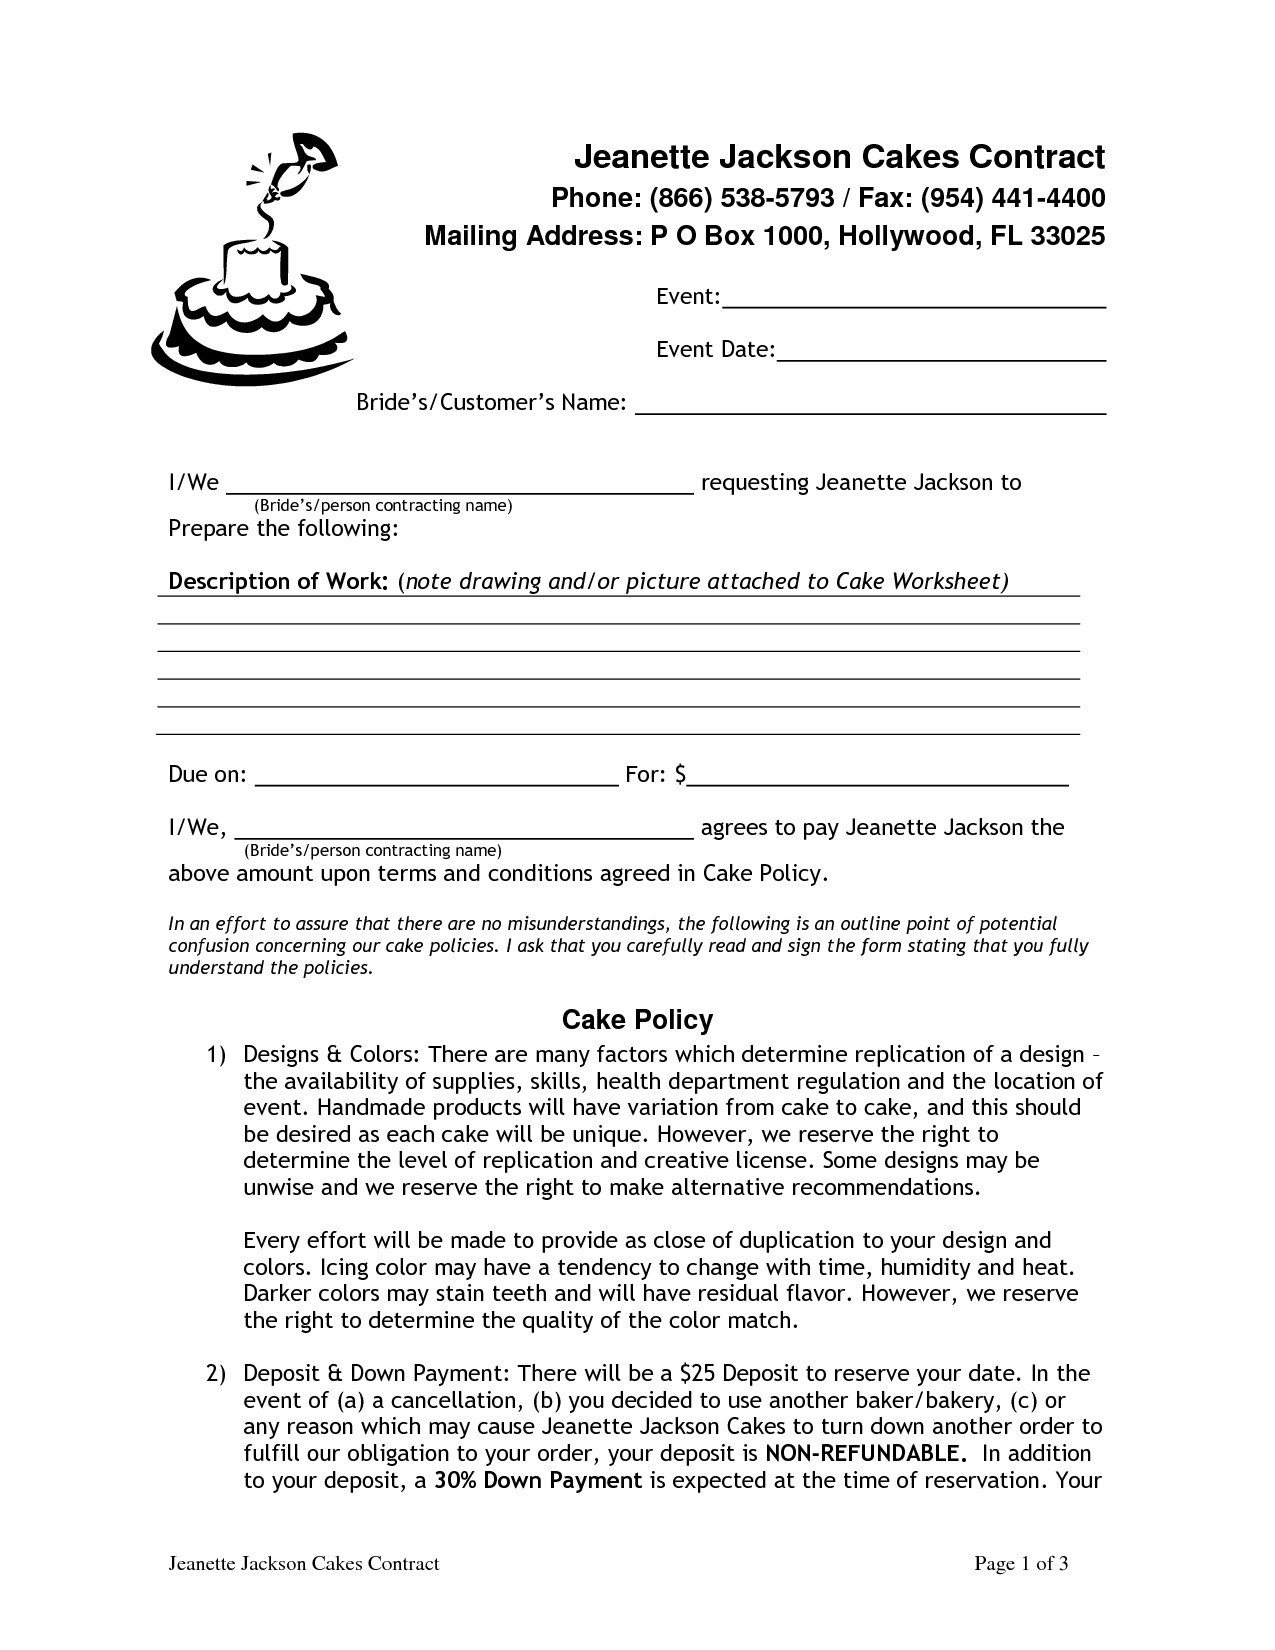 Wedding Cake Contract Pdf being creative